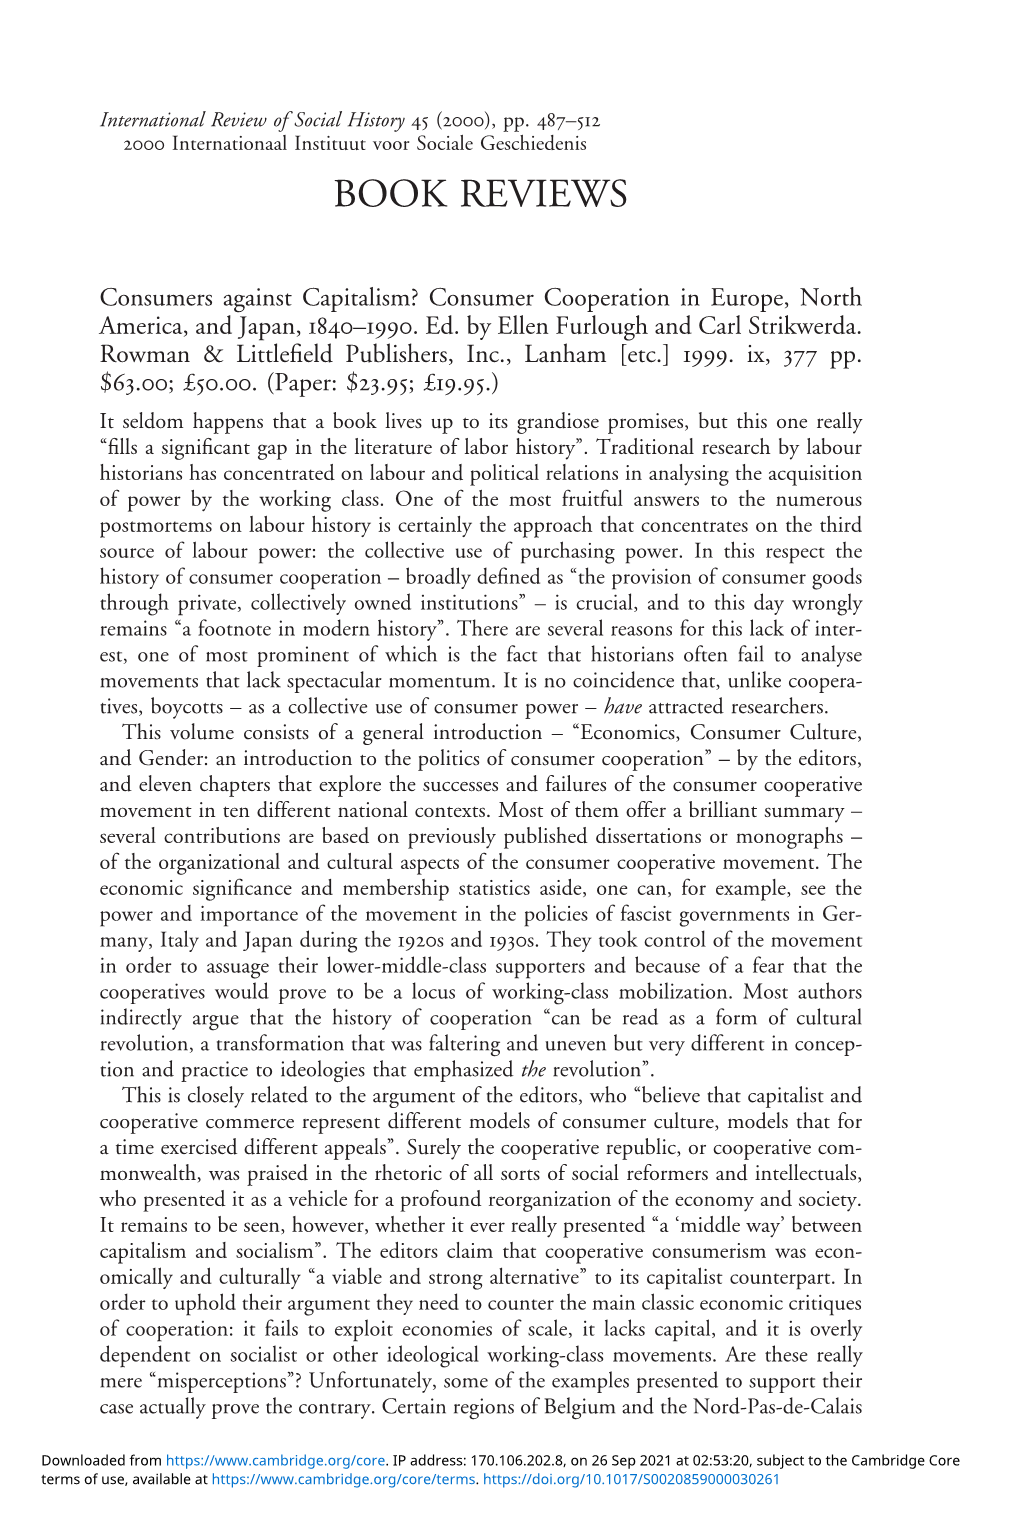 Consumers Against Capitalism? Consumer Cooperation in Europe, North America, and Japan, 1840–1990